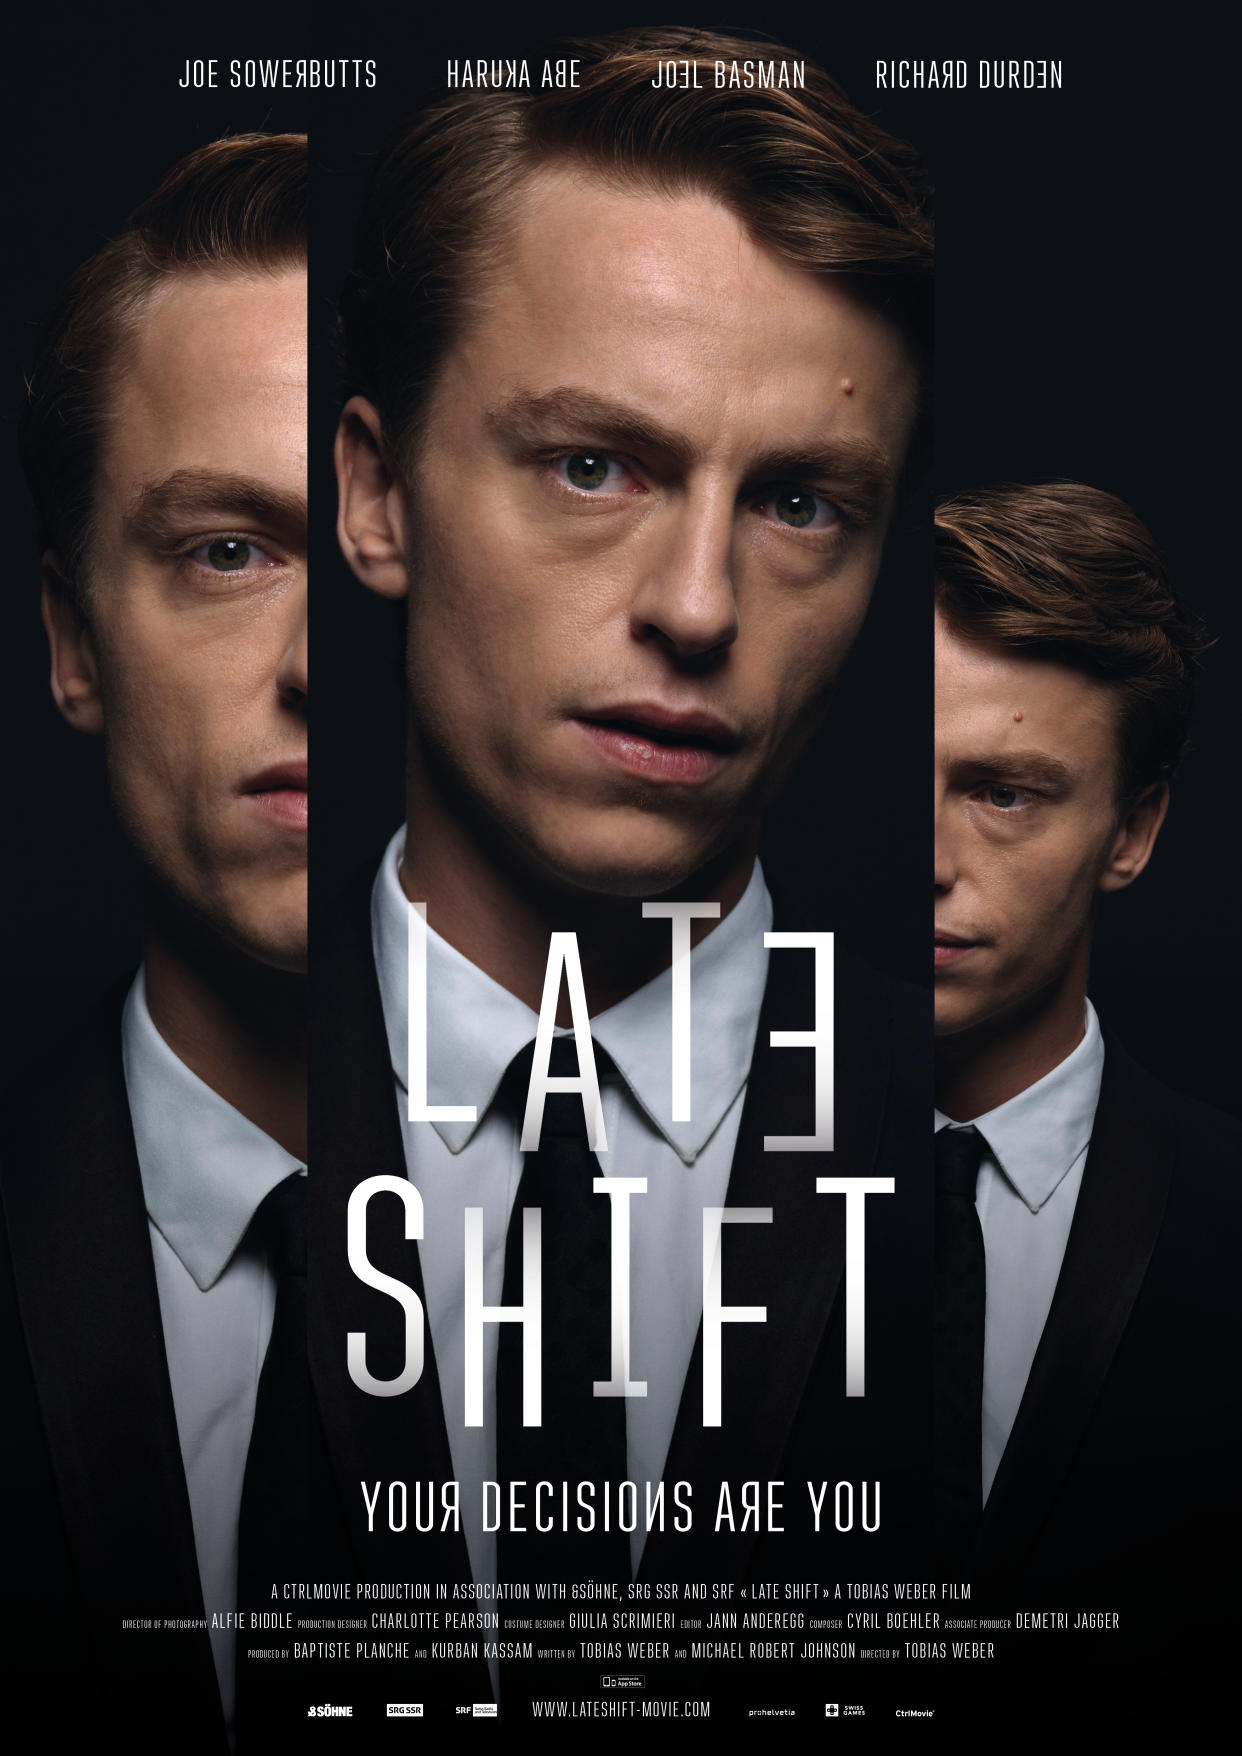 Late Shift, an interactive movie by CtrlMovie.